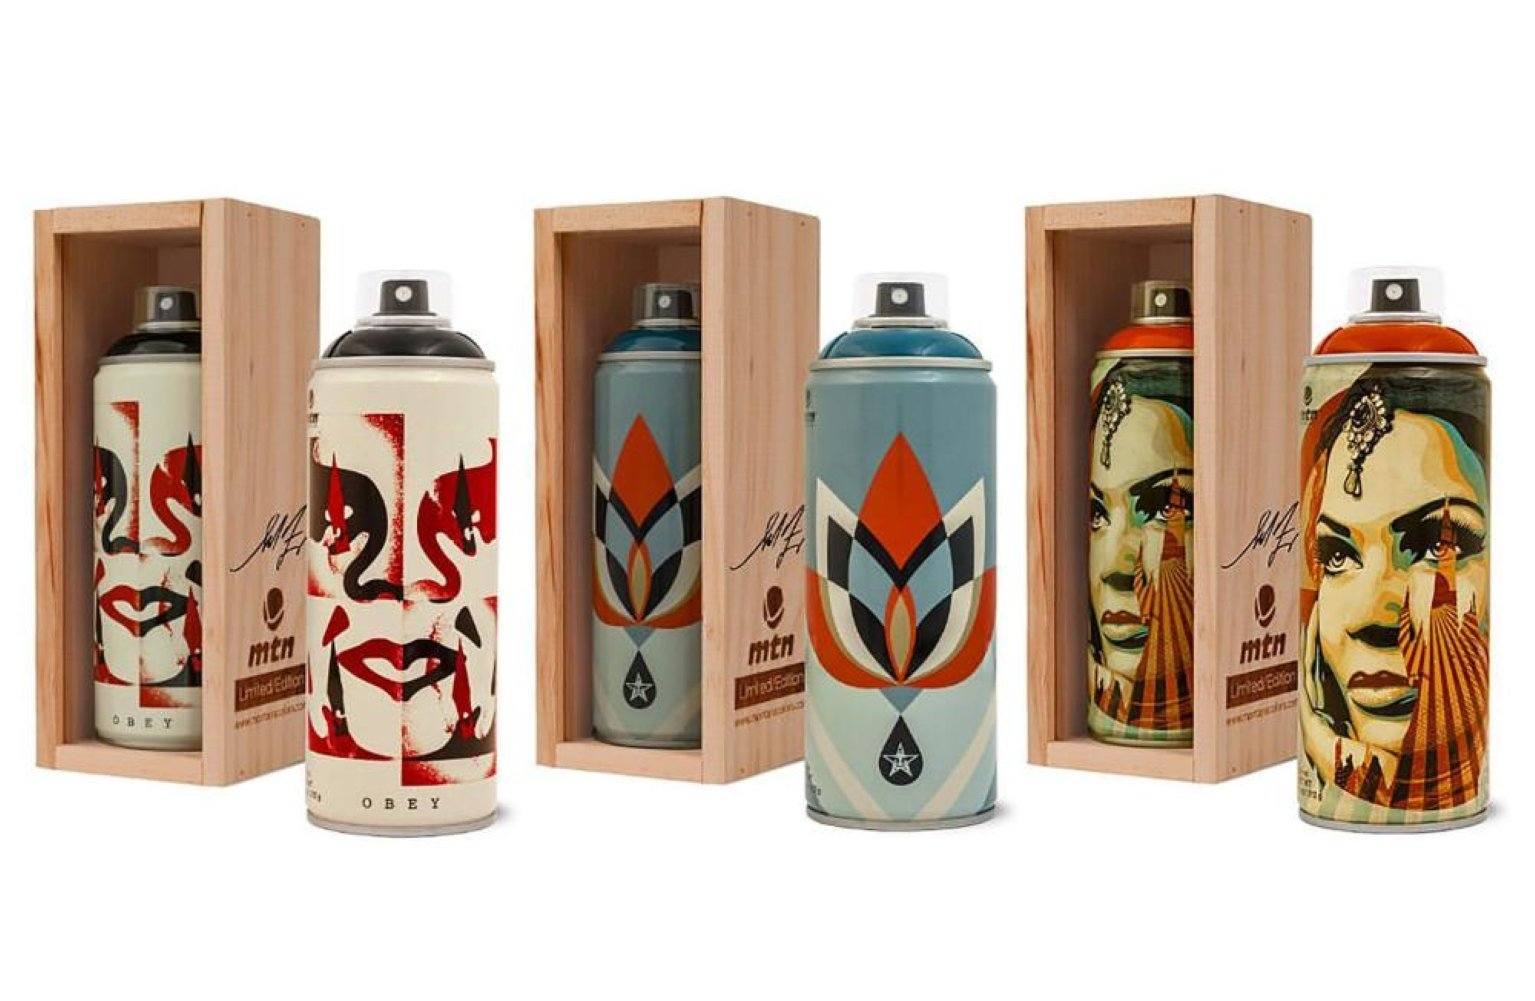 Montana Cans LE Spray paint pack - InfamyArt